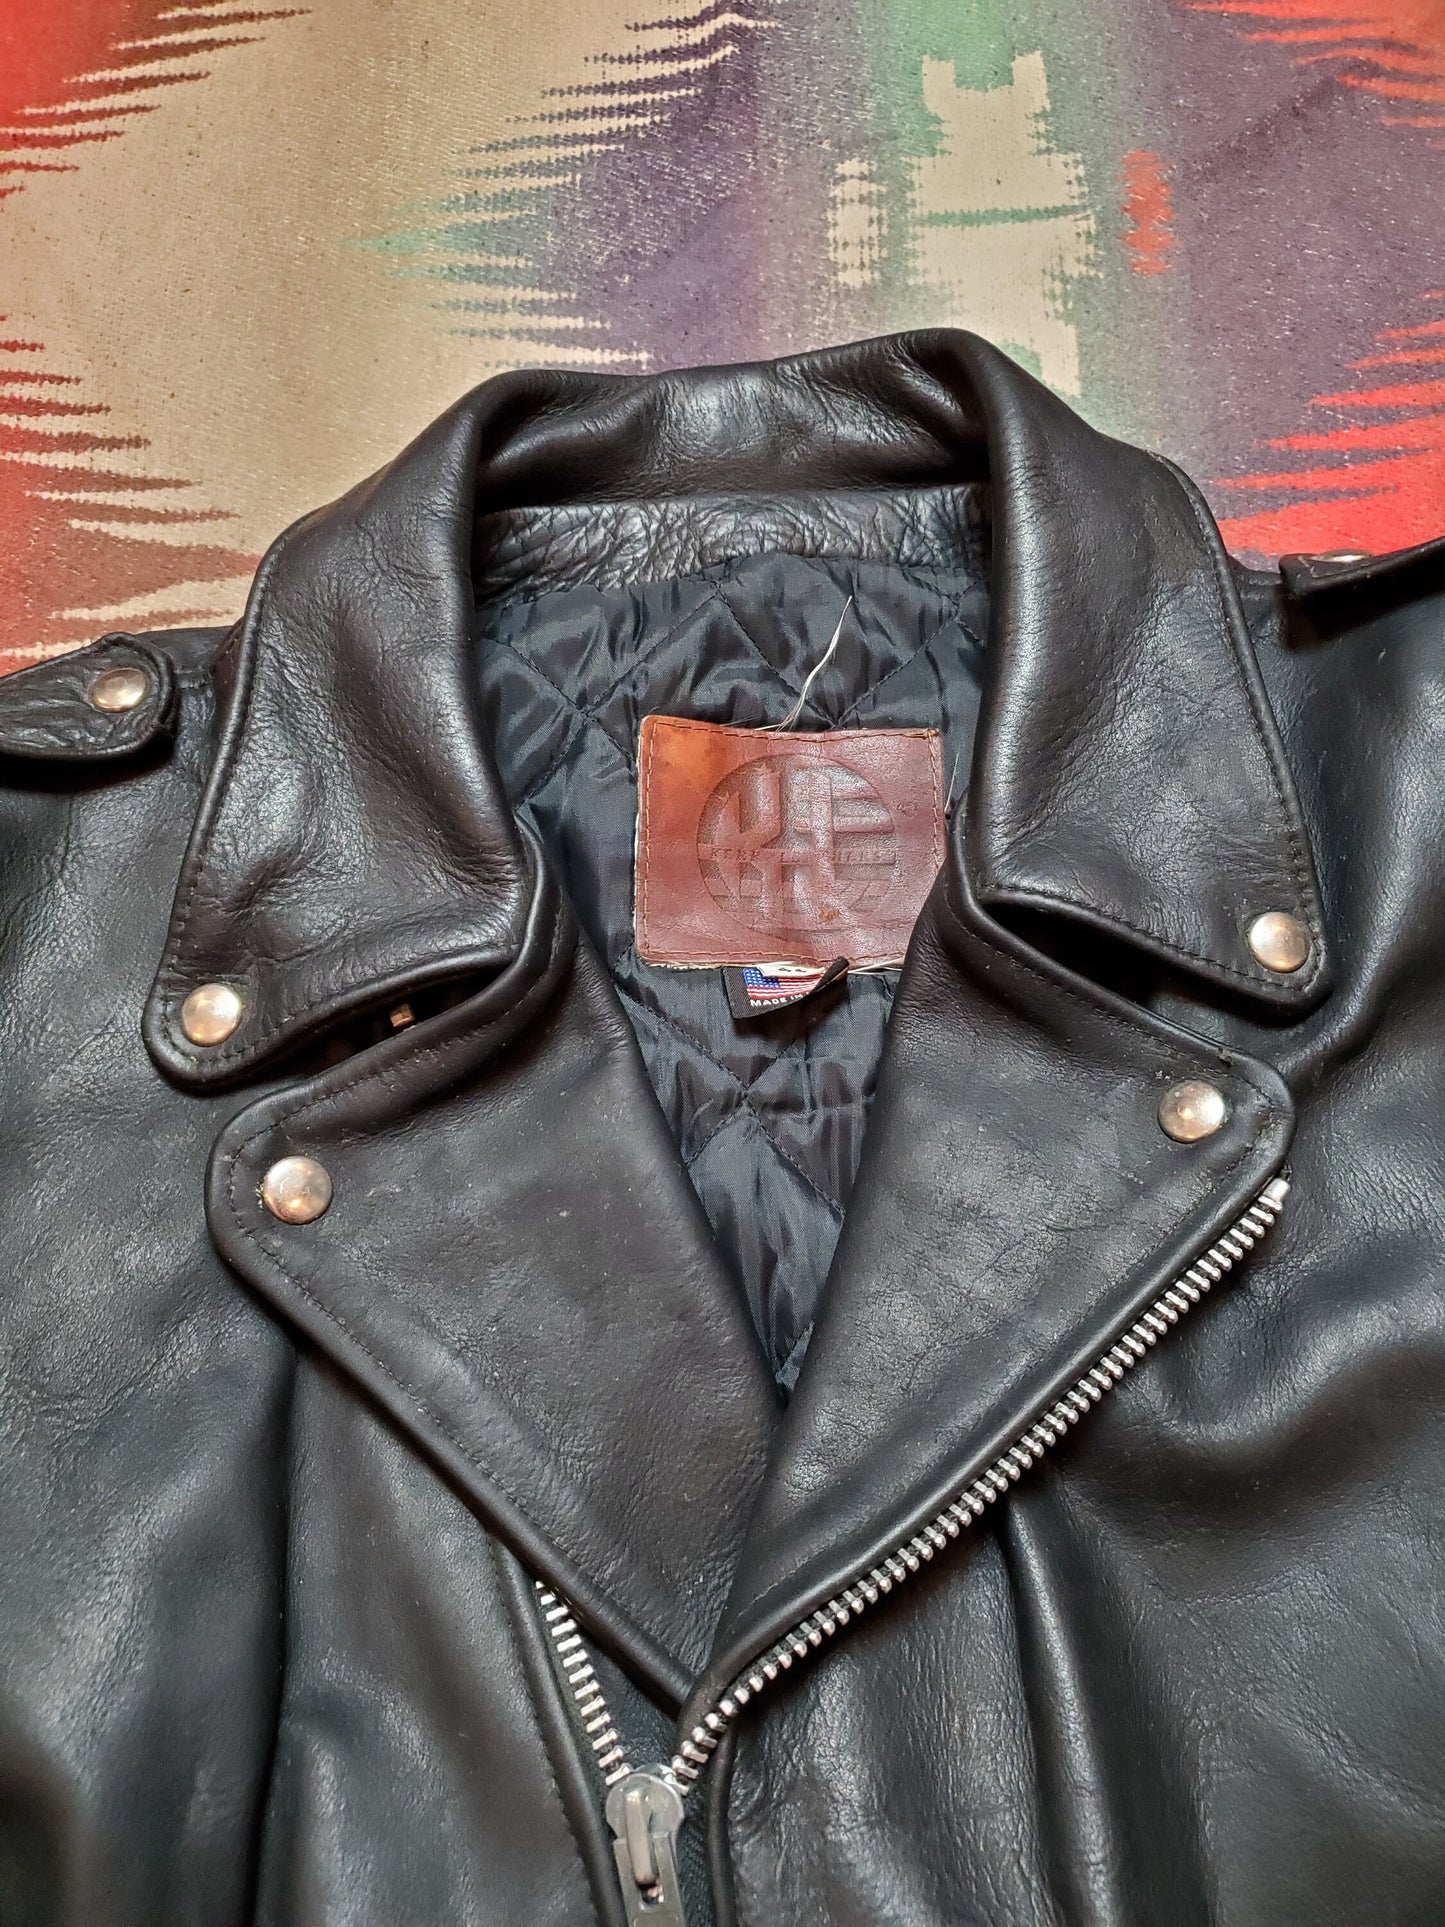 1990s Kerr Leathers Moto Style Leather Motorcycle Jacket Made in USA Size L